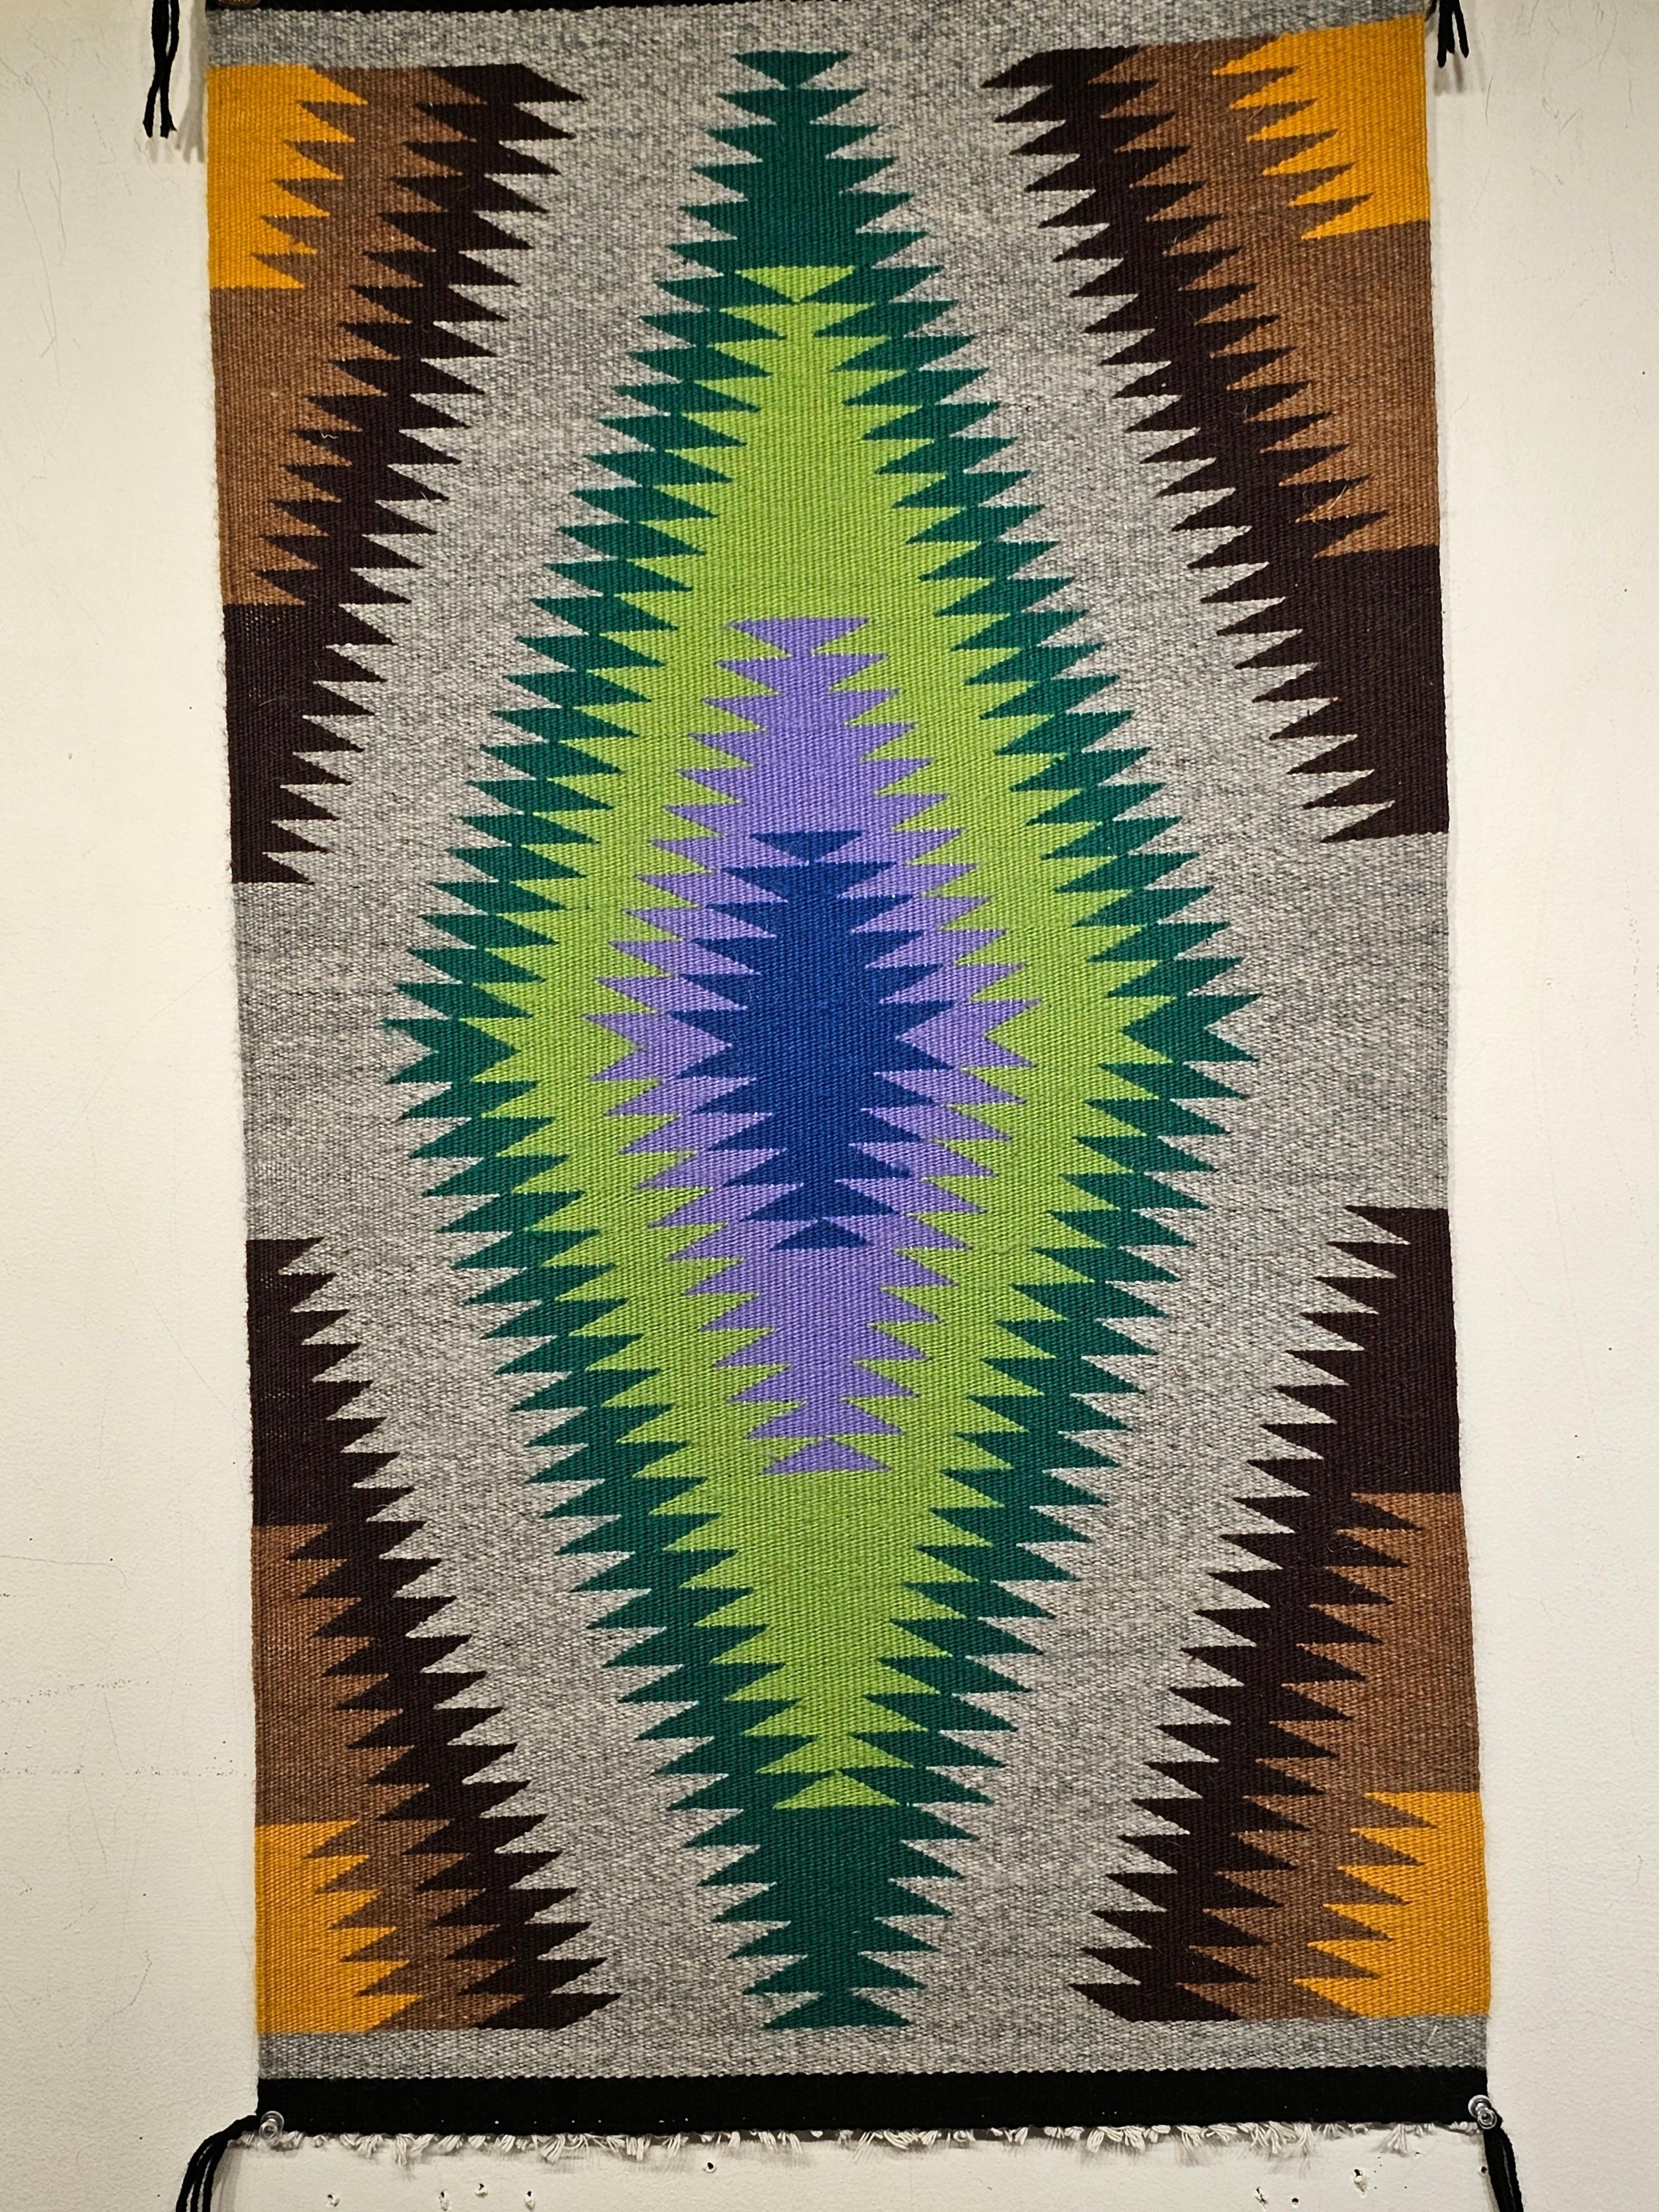 Beautiful vintage Navajo weaving from the SW United States from the mid 1900s. This Navajo rug has a series of diamond form designs radiating out from the center changing color like the color spectrum.  Each diamond consists of a different color